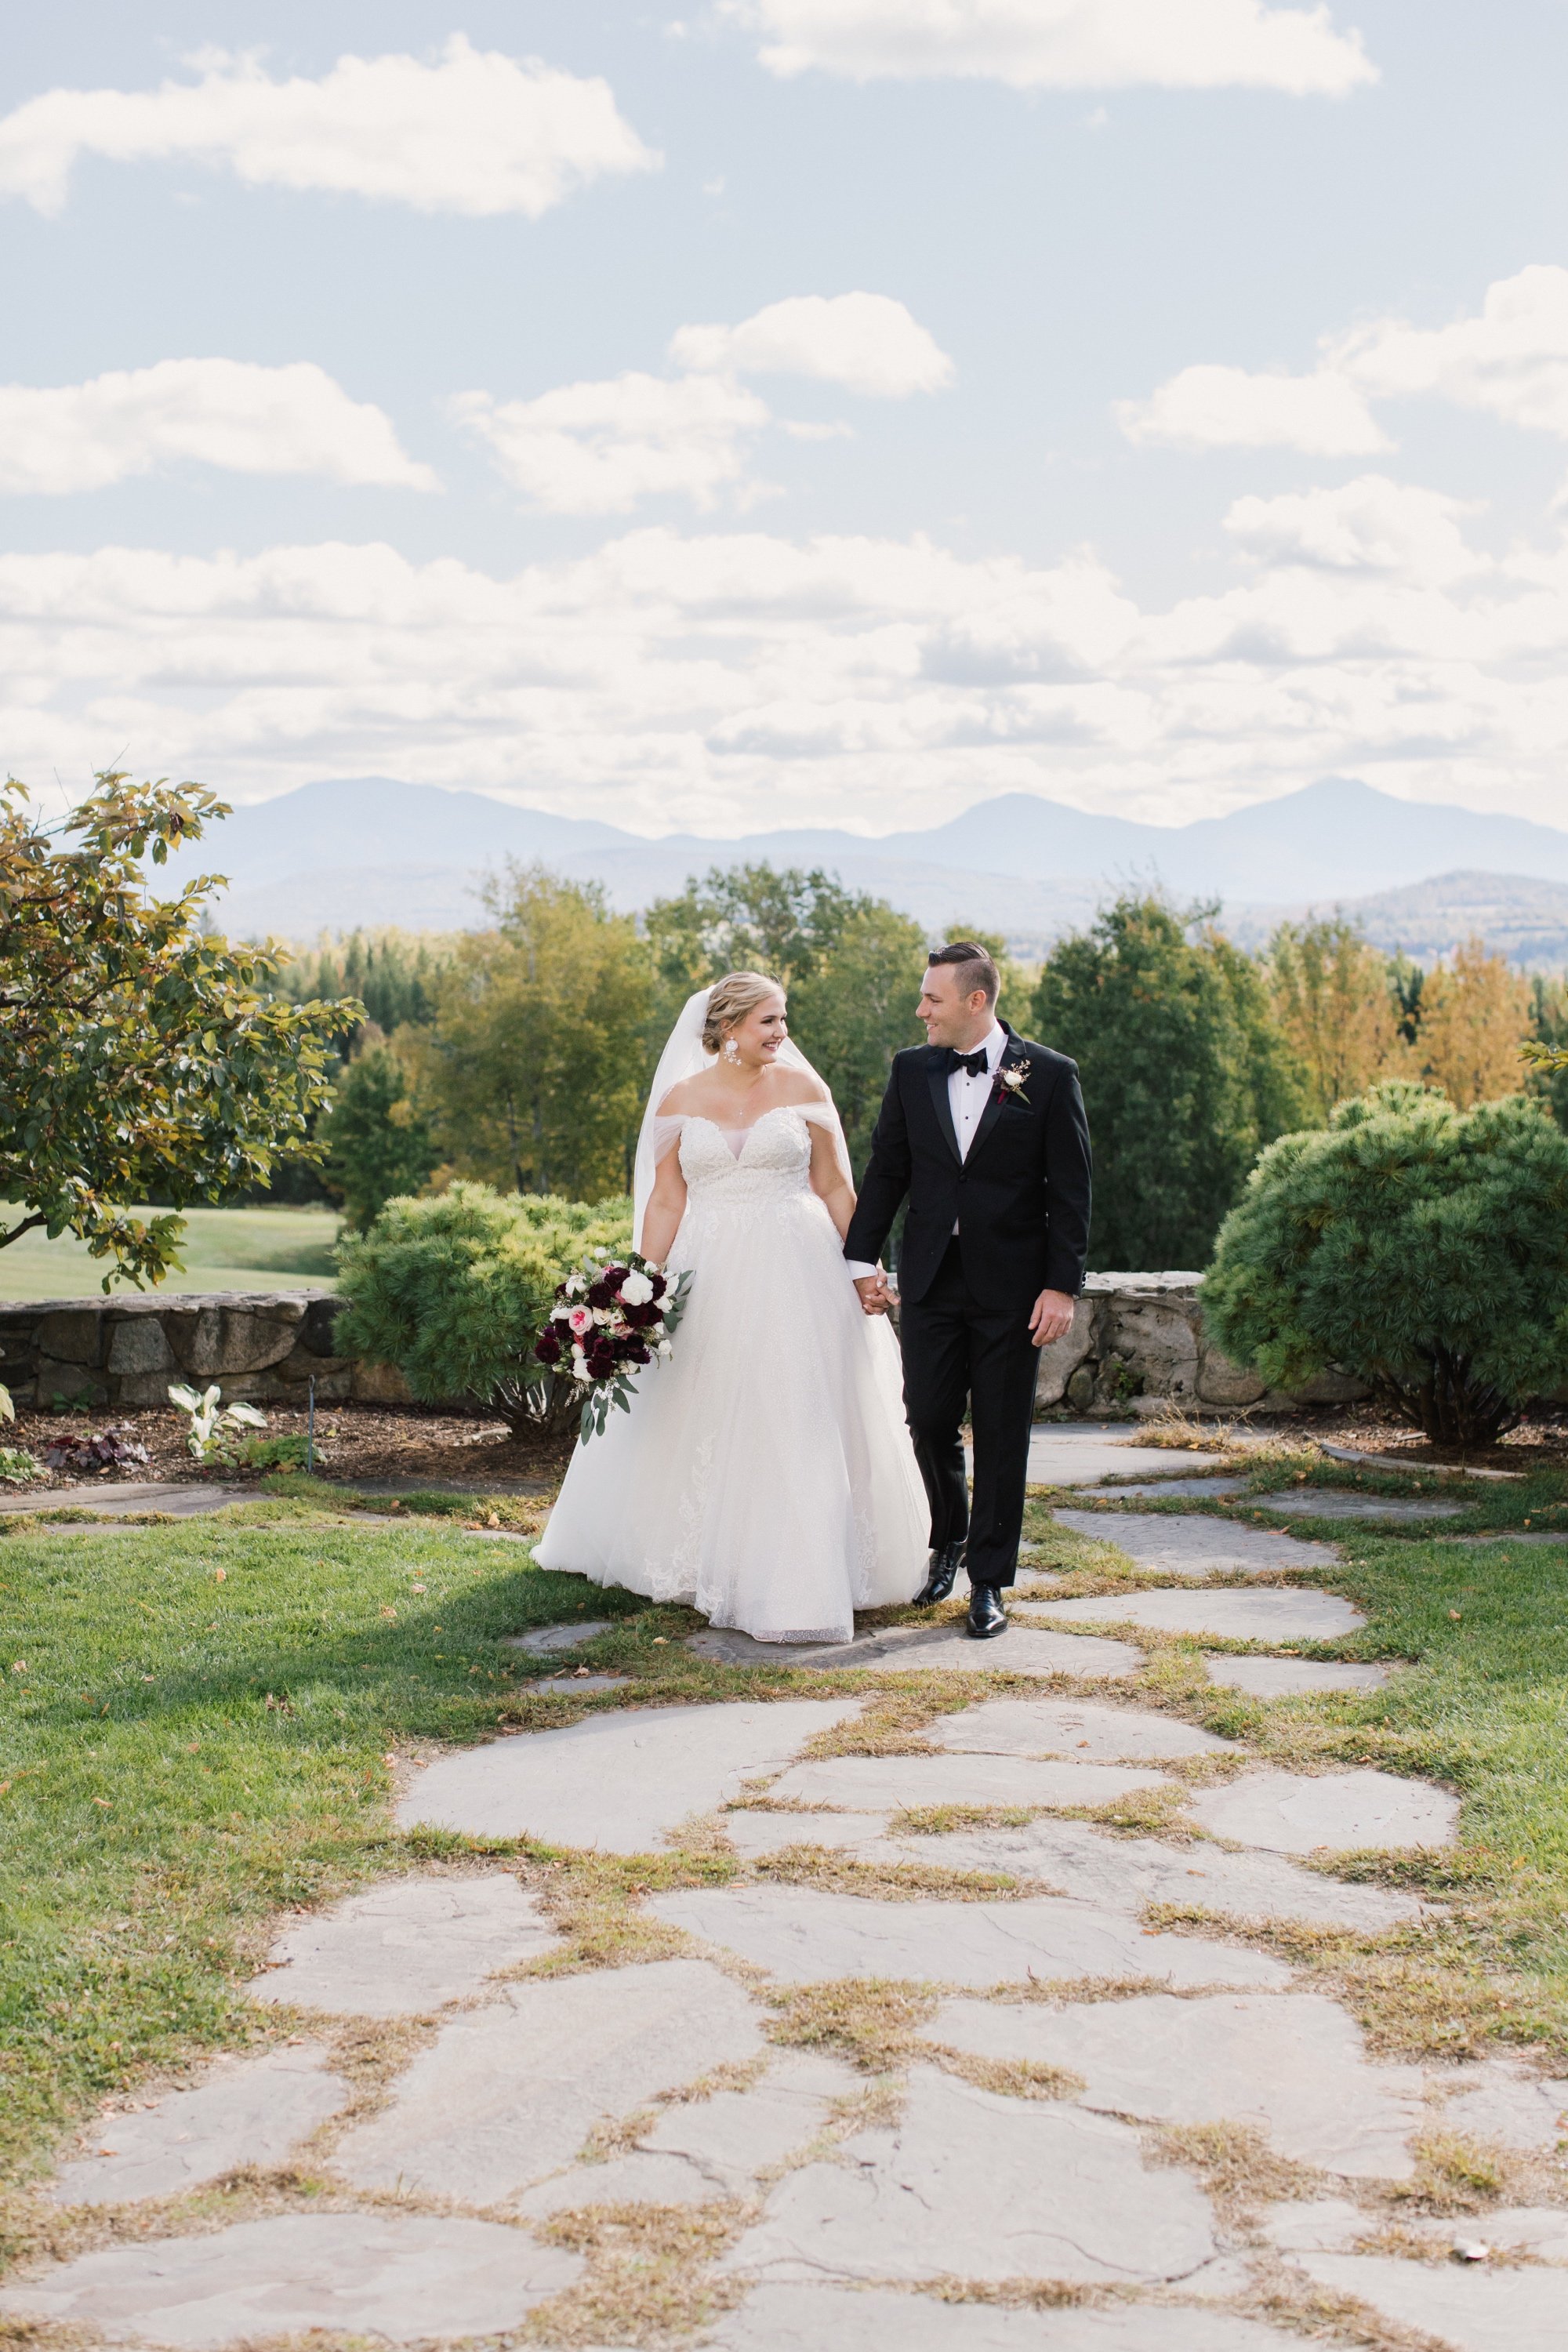 22_whitefield new hampshire NH wedding photography photographer melanie voros blissful events Mountain View Grand Resort and Spa frenchs point washington white mountains MVG.jpg